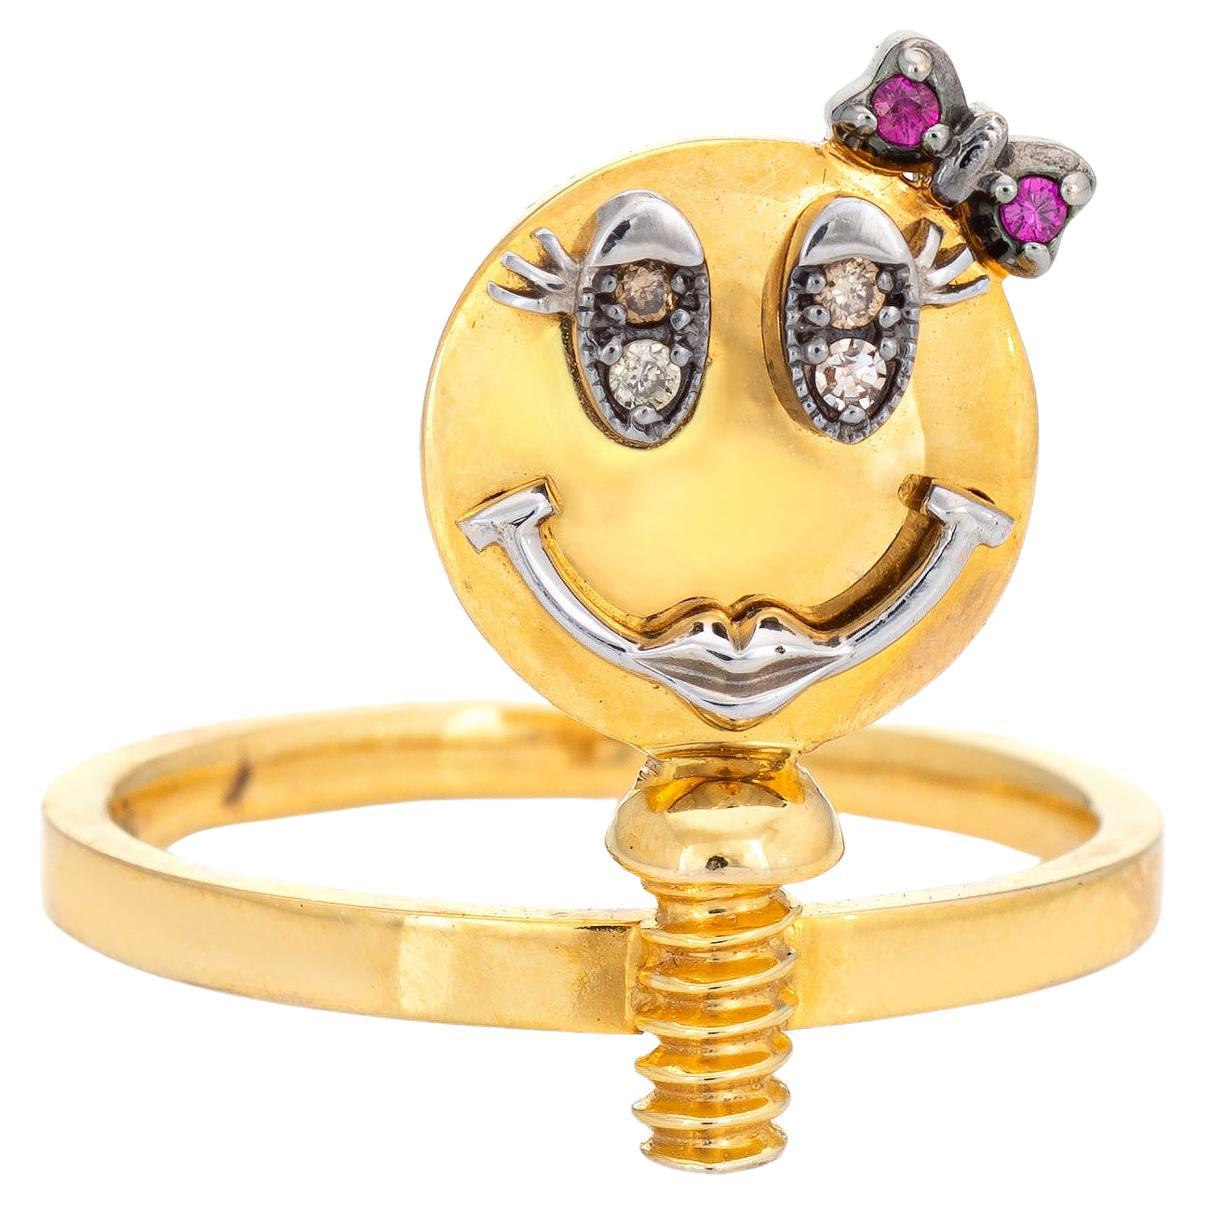 Sally Sohn Happy Face Ring Diamond Ruby Sz 5.25 Estate Fine Signed Jewelry For Sale